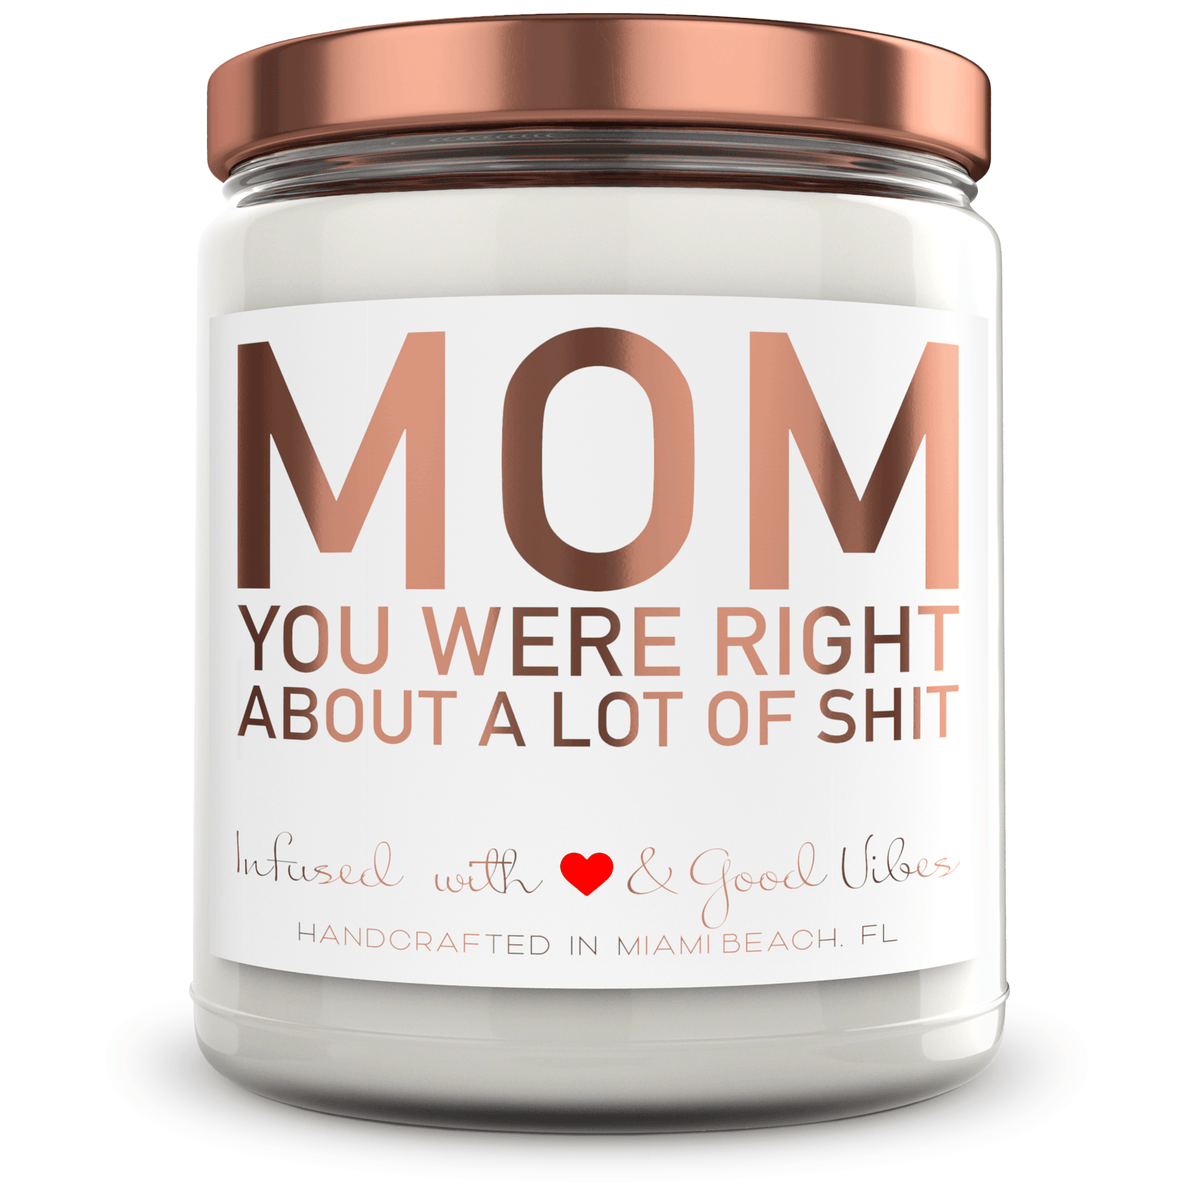 Mom, you were right about a lot of SHIT - Mint Sugar Candle